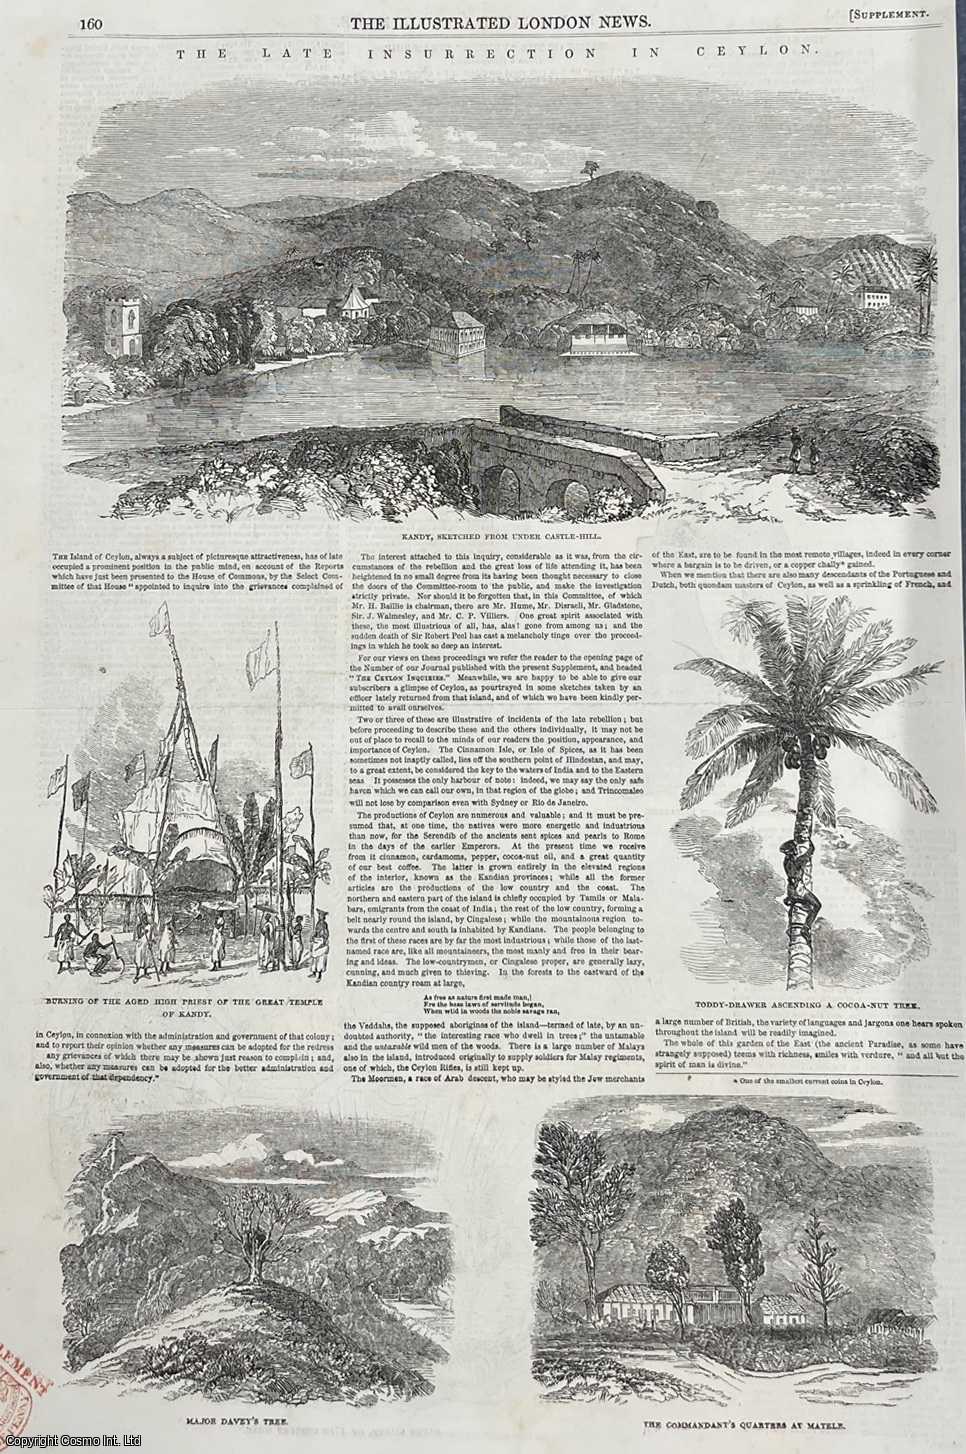 SRI LANKA - Insurrection in Ceylon. A collection of original woodcut engravings, with accompanying text from the Illustrated London News, 1850.